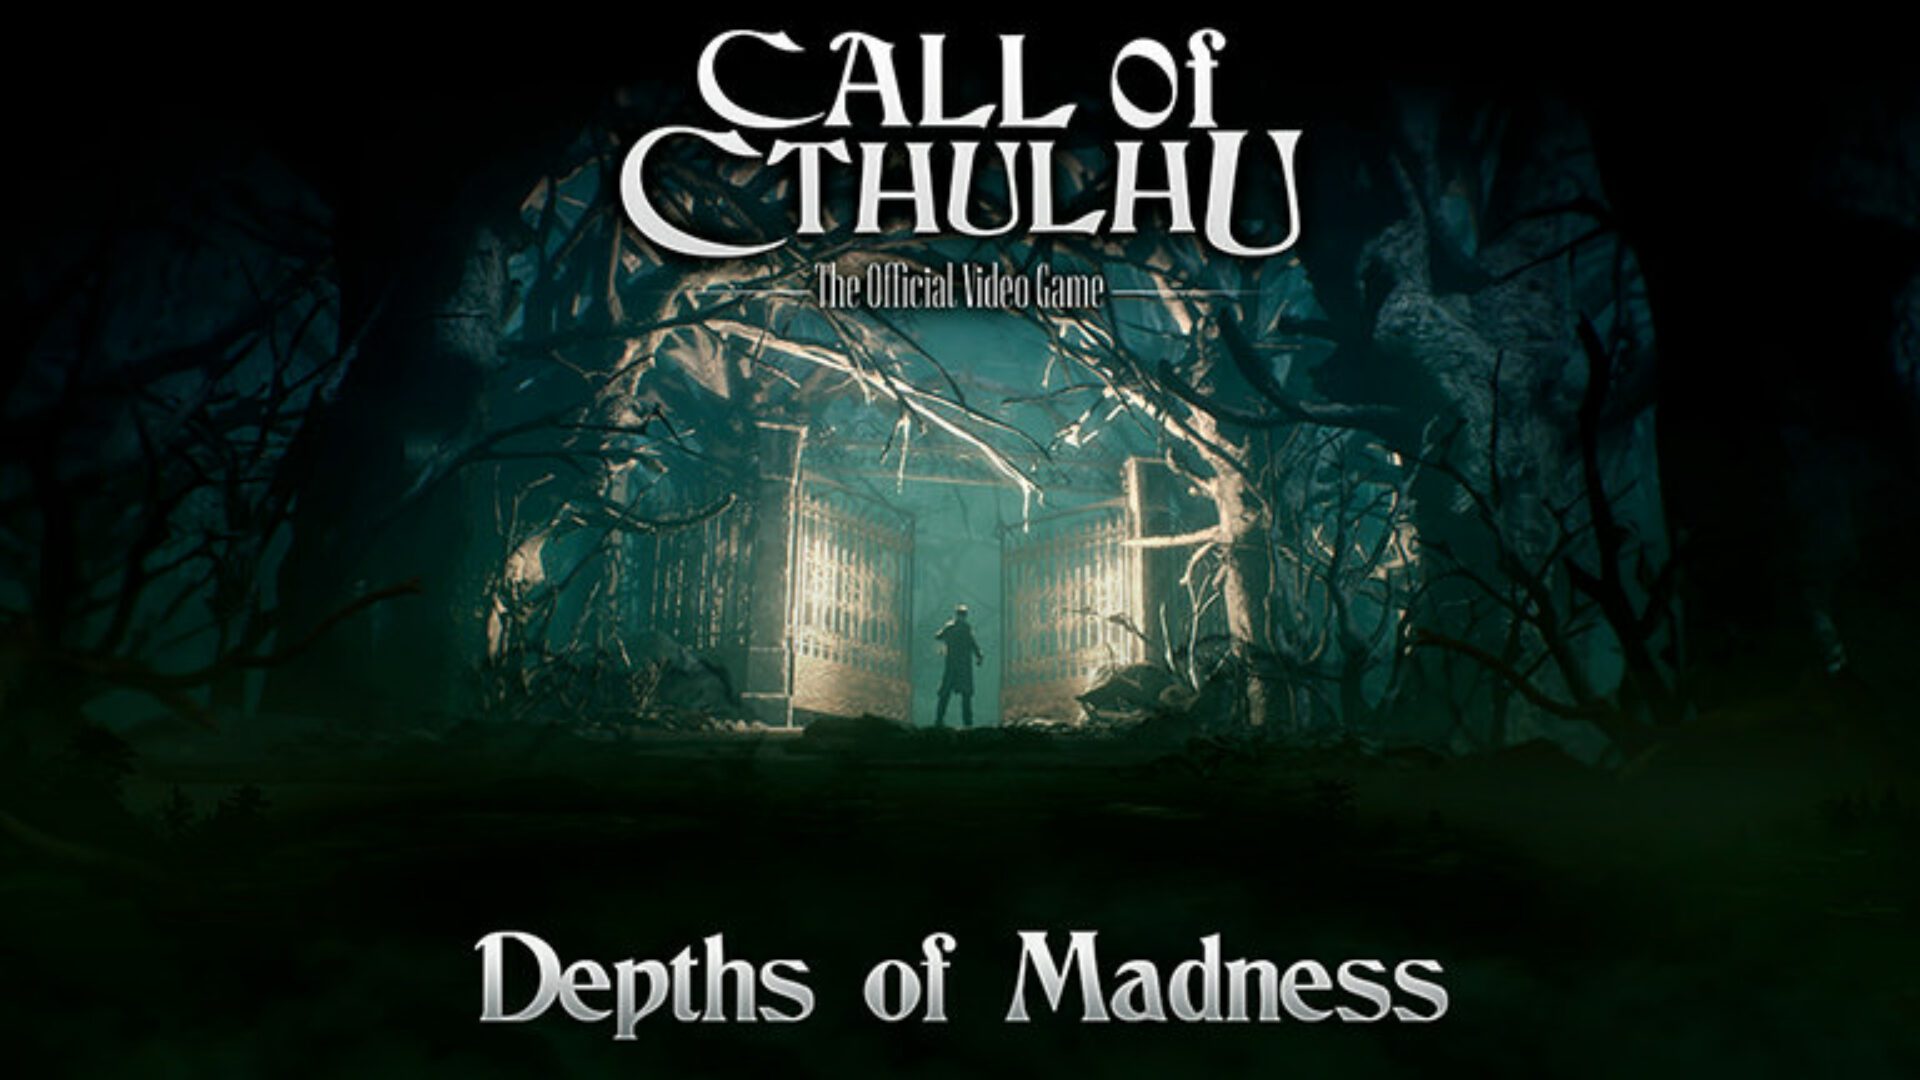 New Call of Cthulhu Trailer Asks You To Question Your Sanity